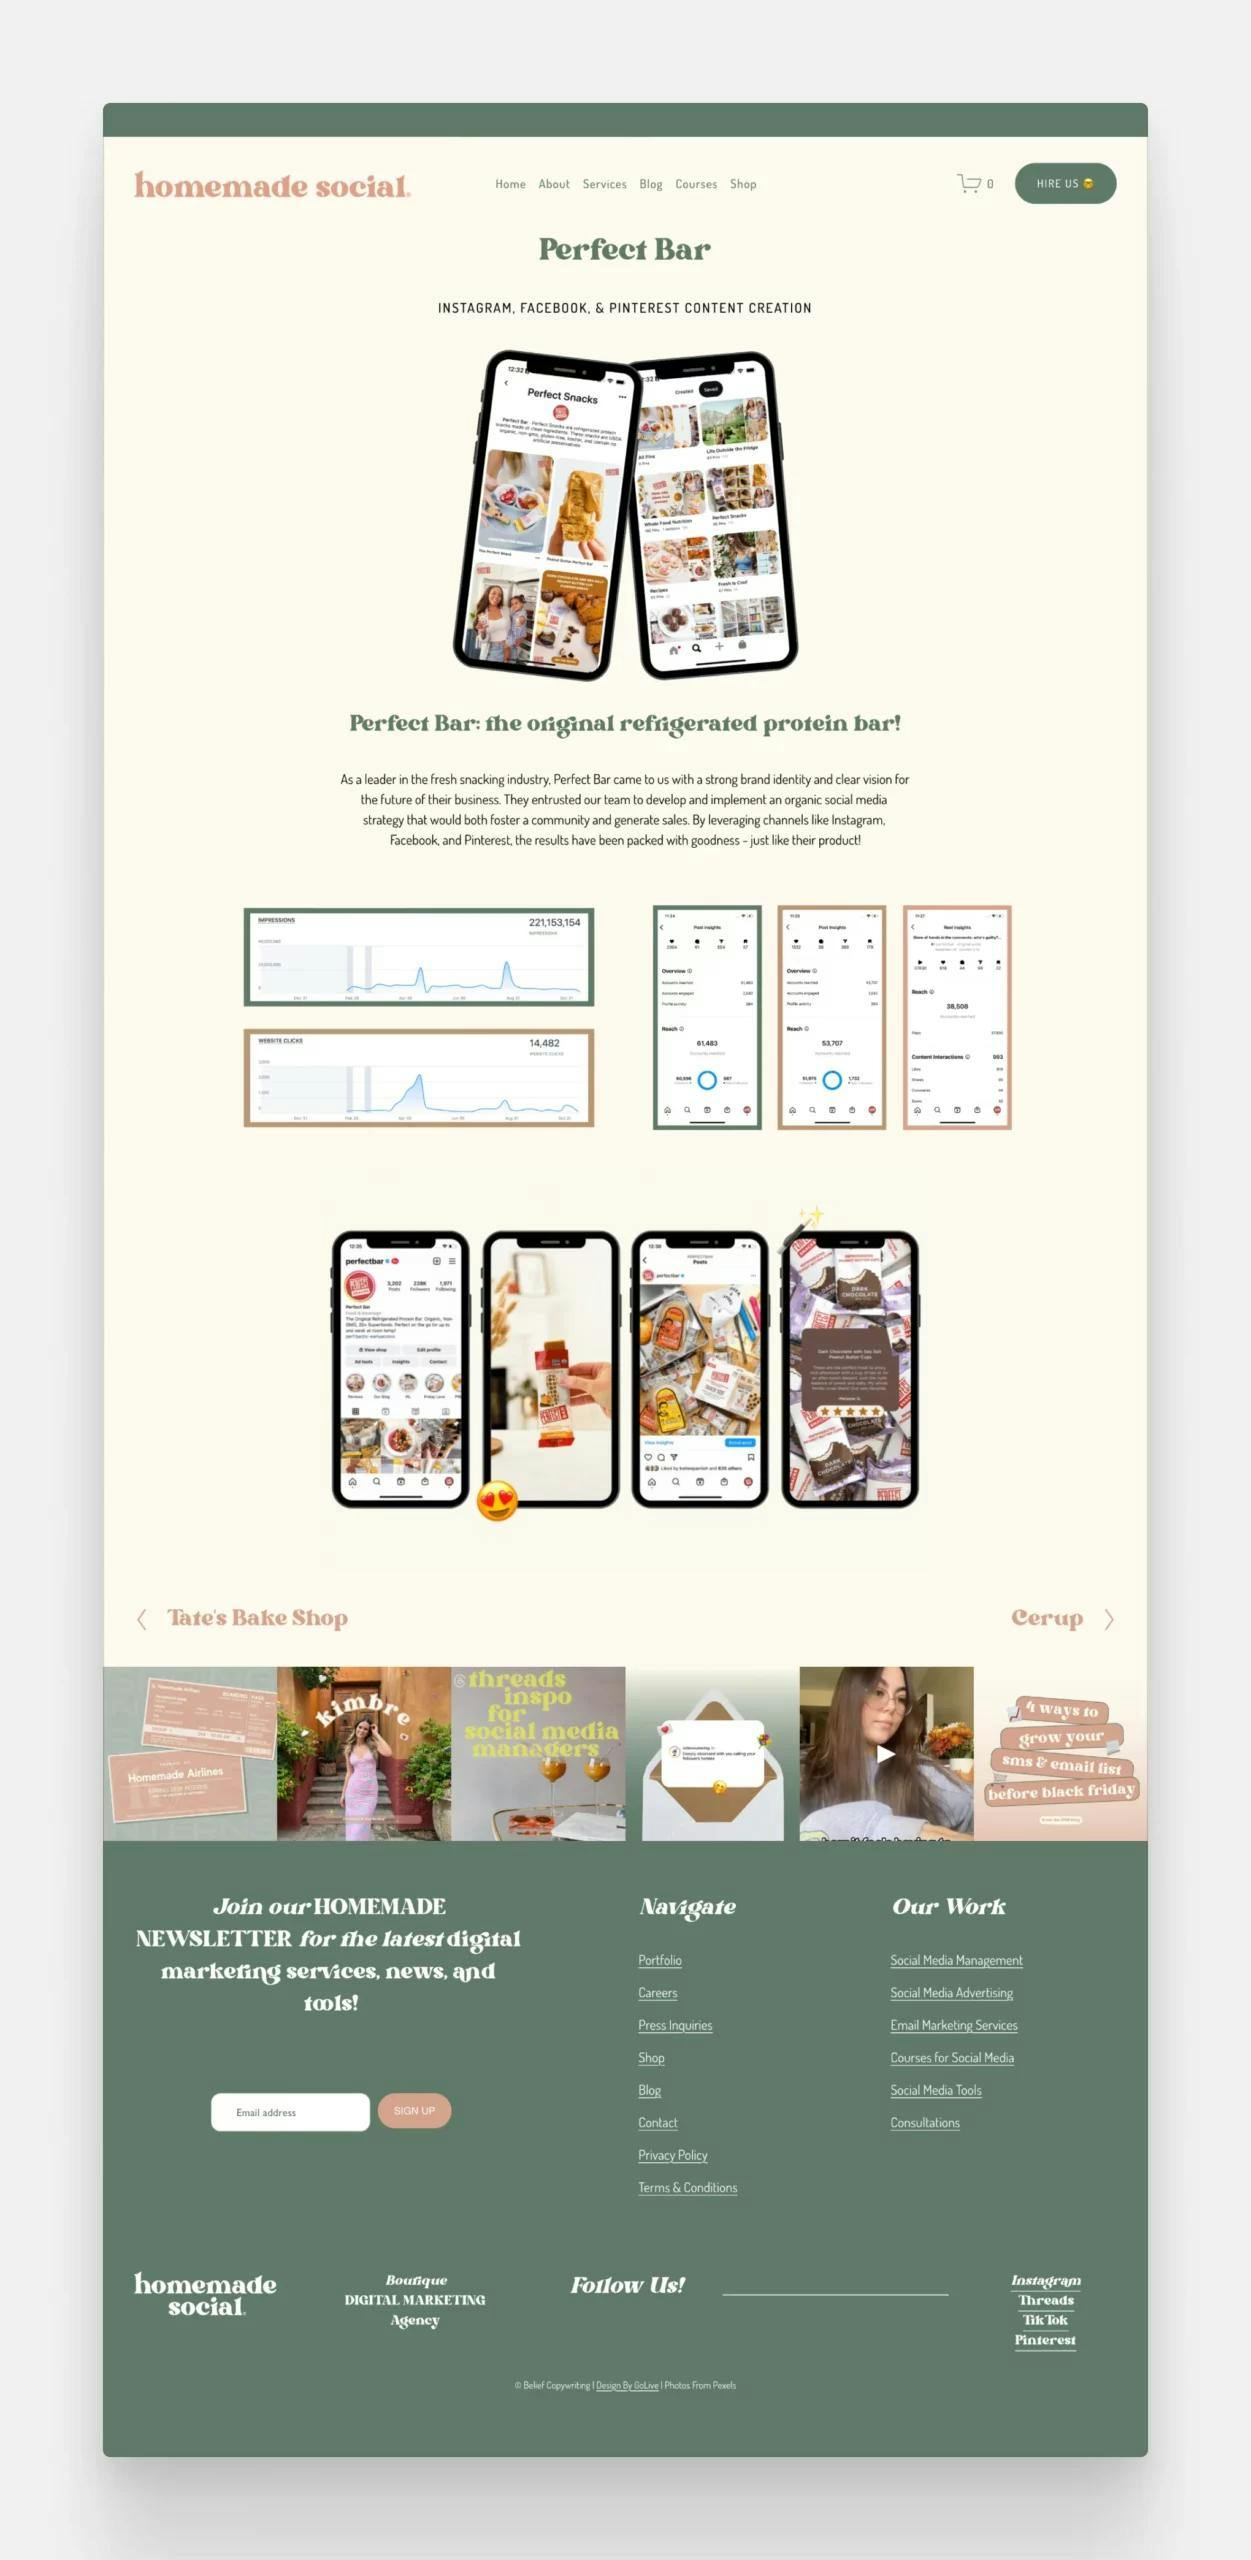 A social media case study page written about a project titled "Perfect Bar", which included content creation for Instagram, Facebook, and Pinterest